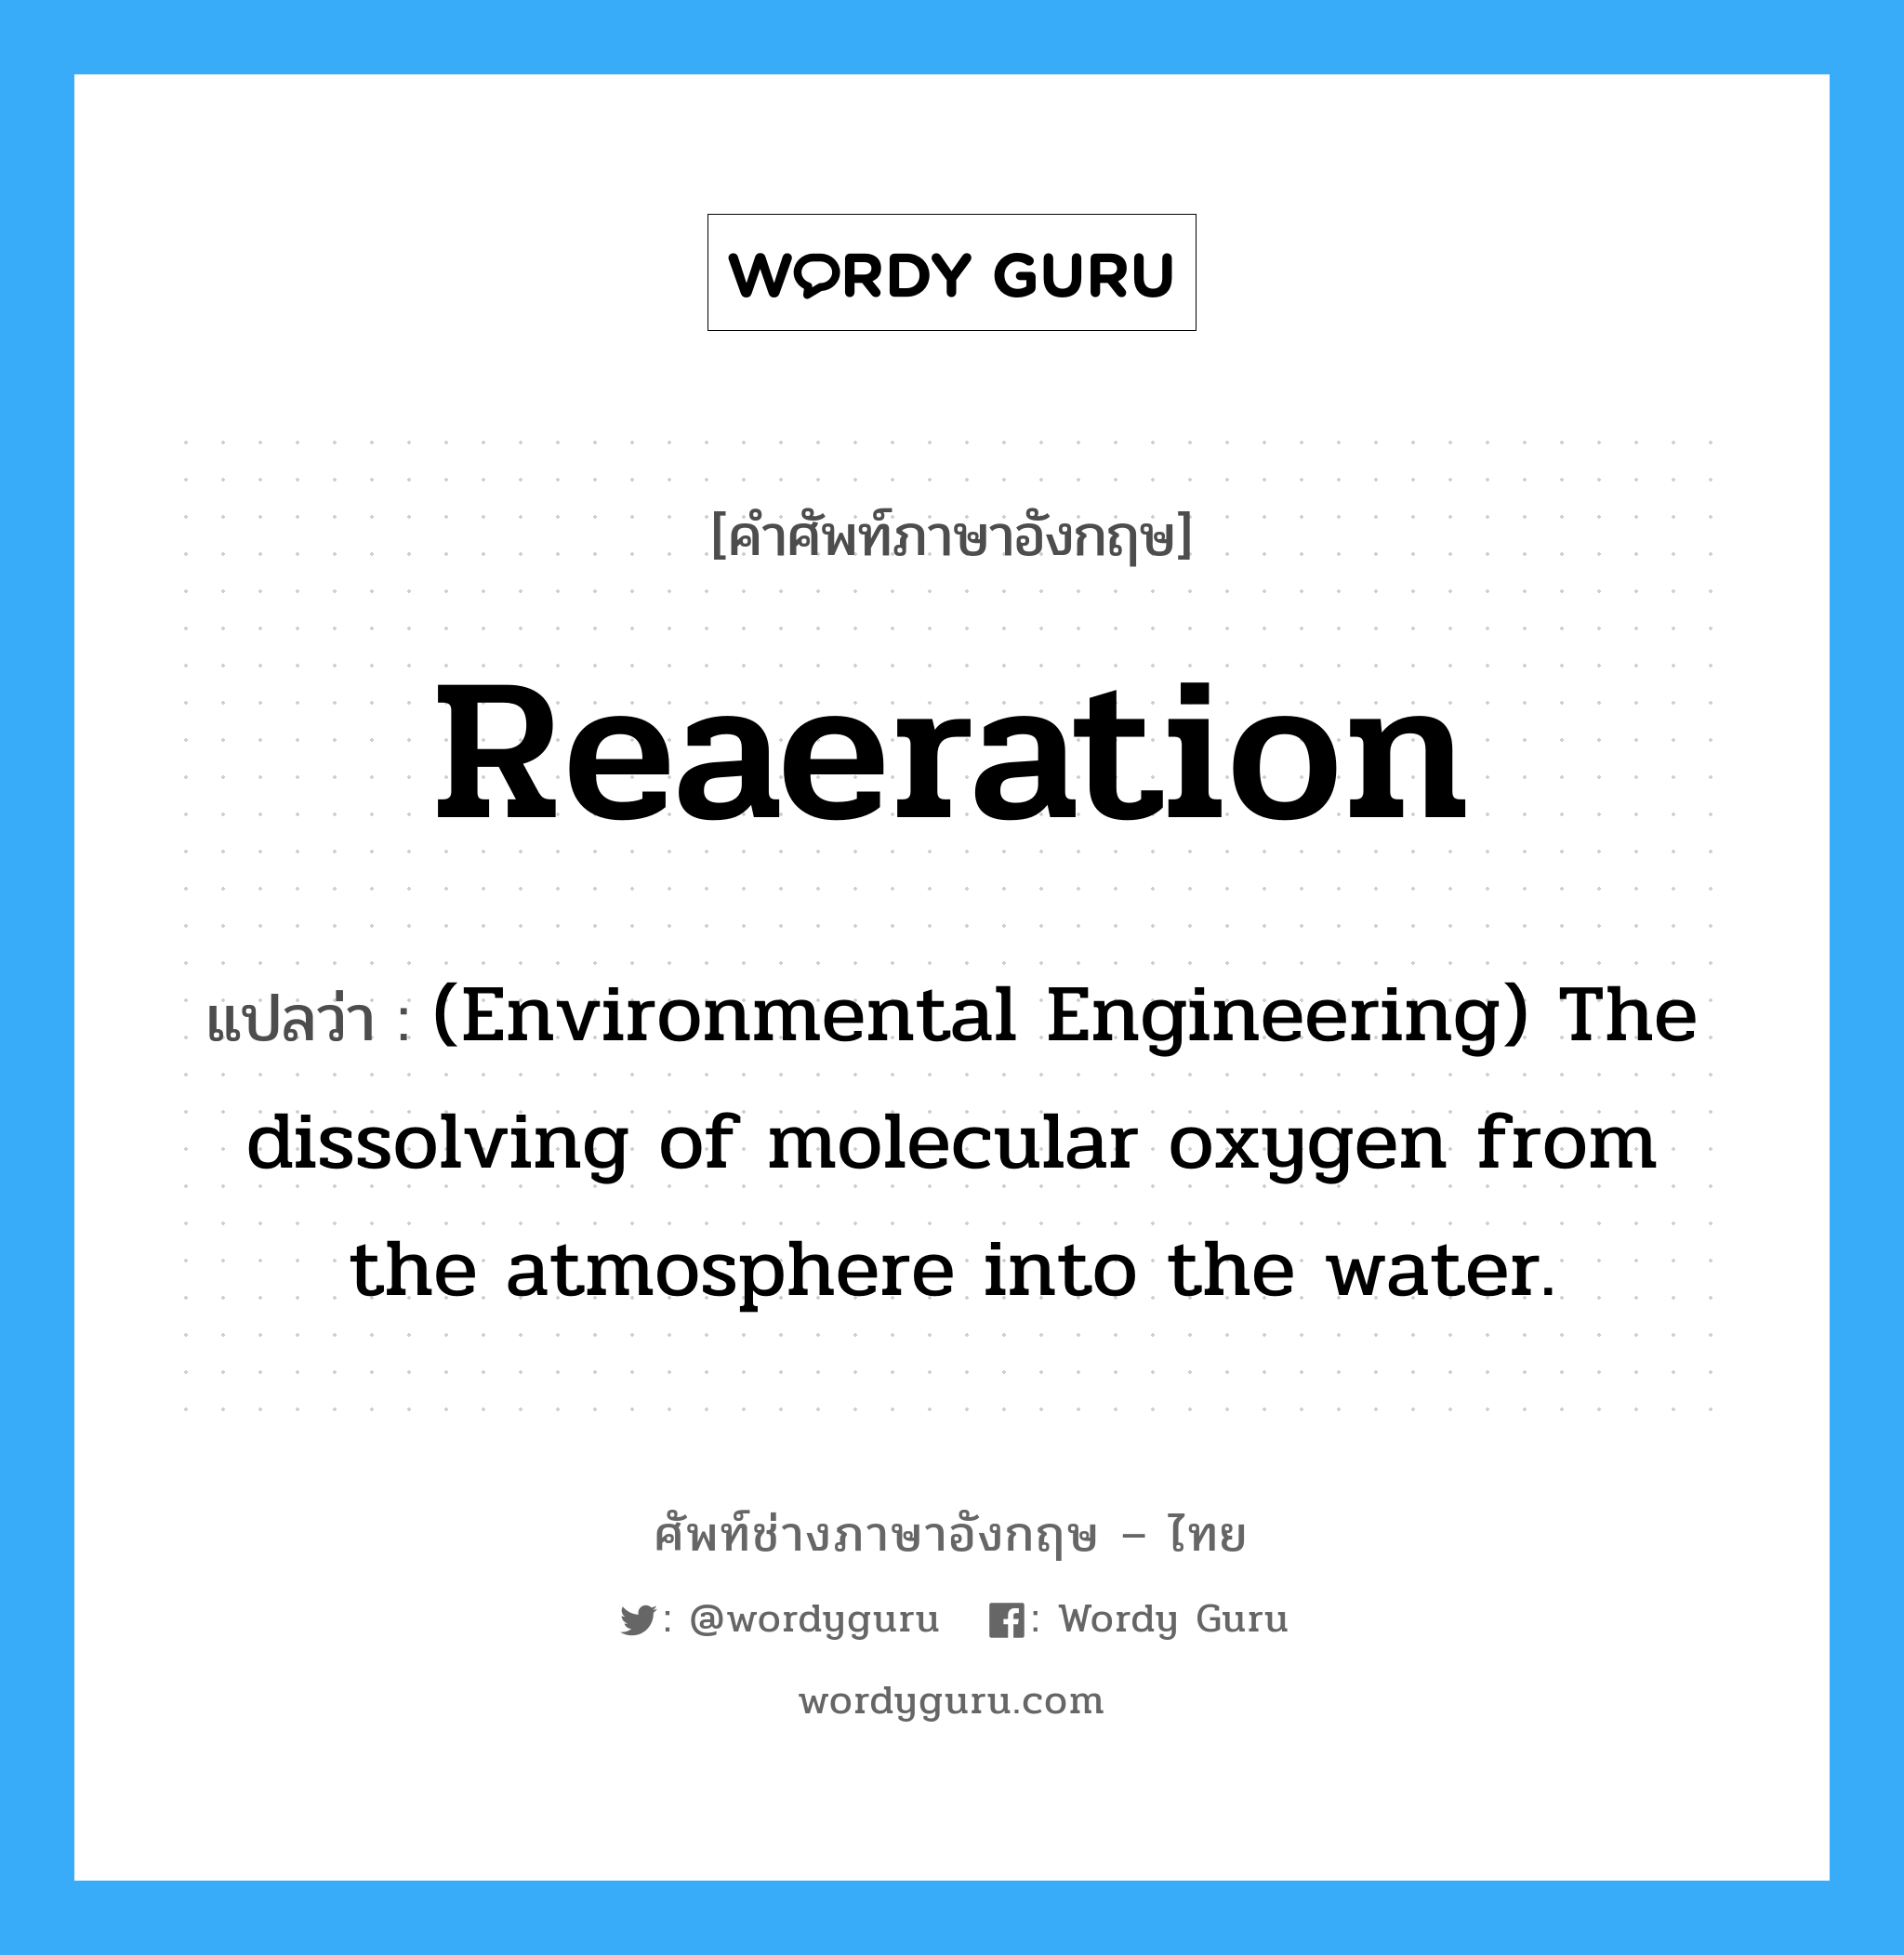 Reaeration แปลว่า?, คำศัพท์ช่างภาษาอังกฤษ - ไทย Reaeration คำศัพท์ภาษาอังกฤษ Reaeration แปลว่า (Environmental Engineering) The dissolving of molecular oxygen from the atmosphere into the water.